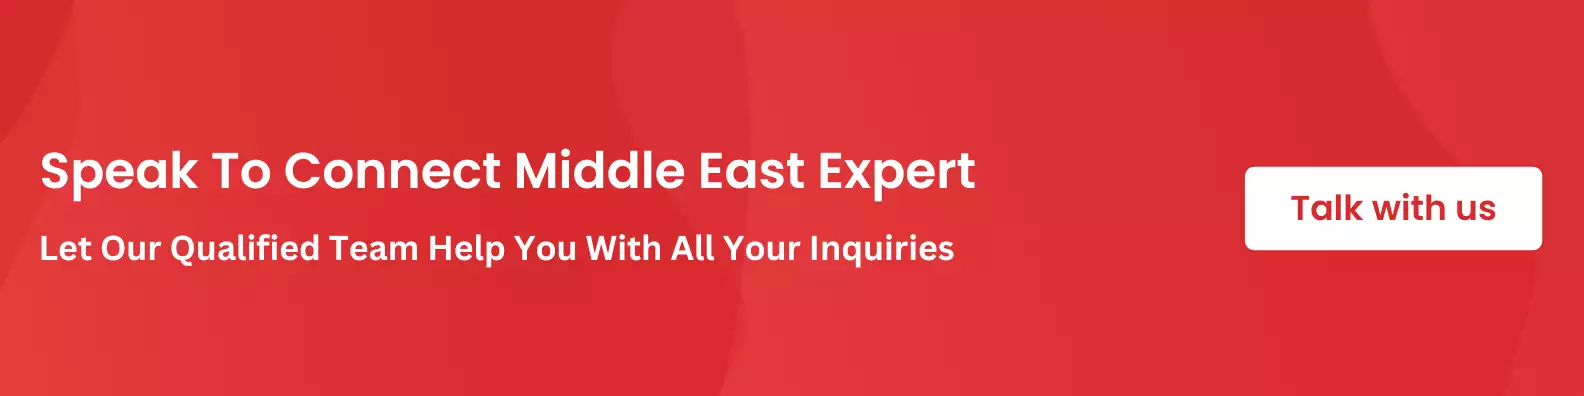 ICA Smart Services in uae 